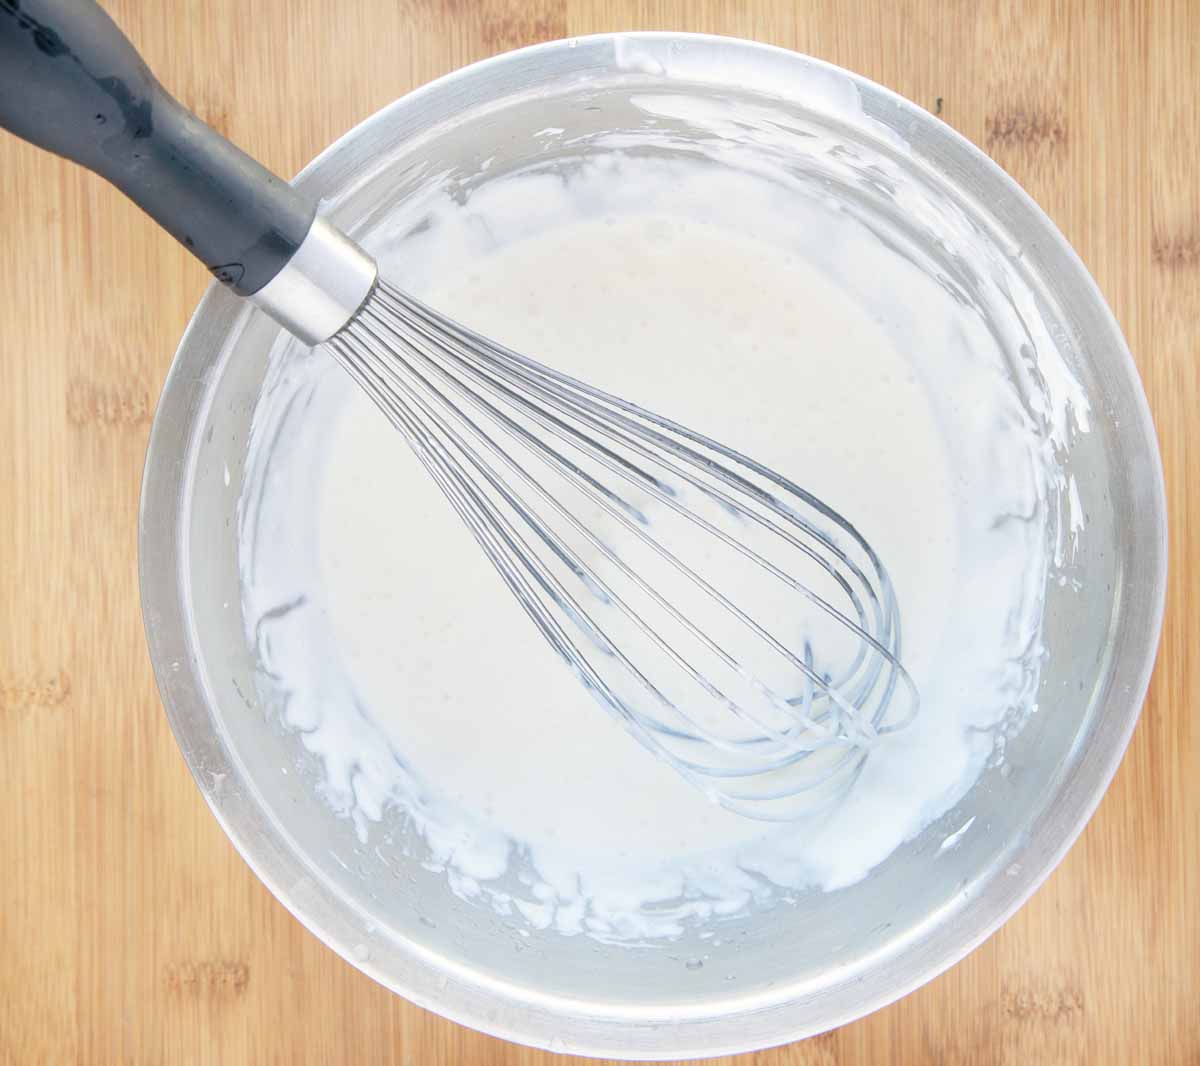 lime cream in a stainless steel bowl with a wire whisk